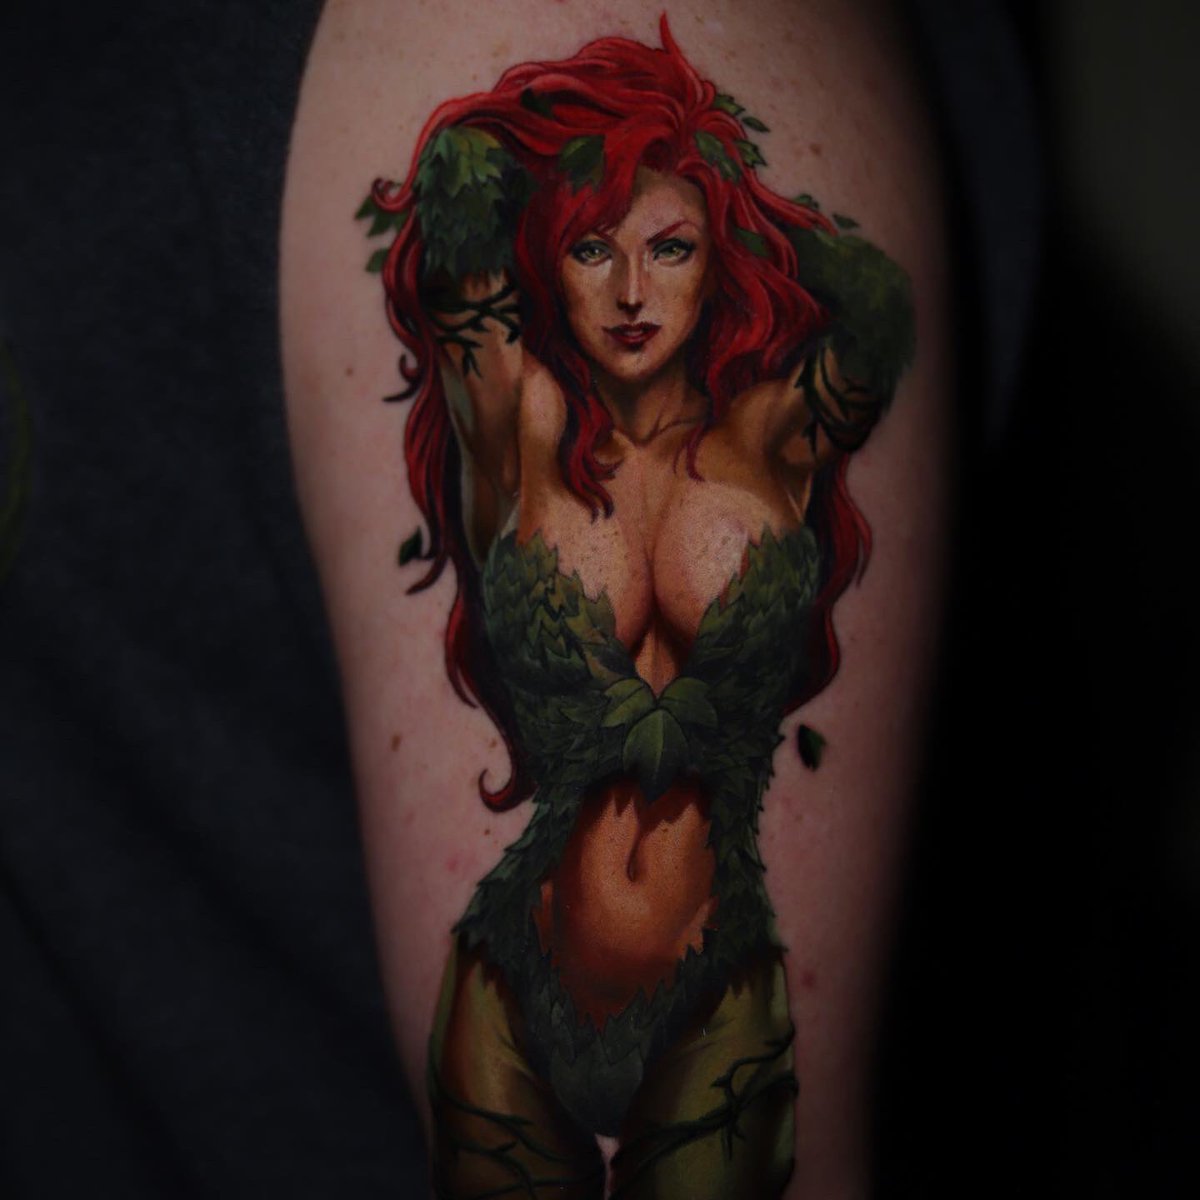 I love doing portraits!🥳   Batgirl from  Teen Titans in her new fall look.

#dccomics #poisonivy #poisonivytattoo #batmantattoo #portraittattoos #comictattoo